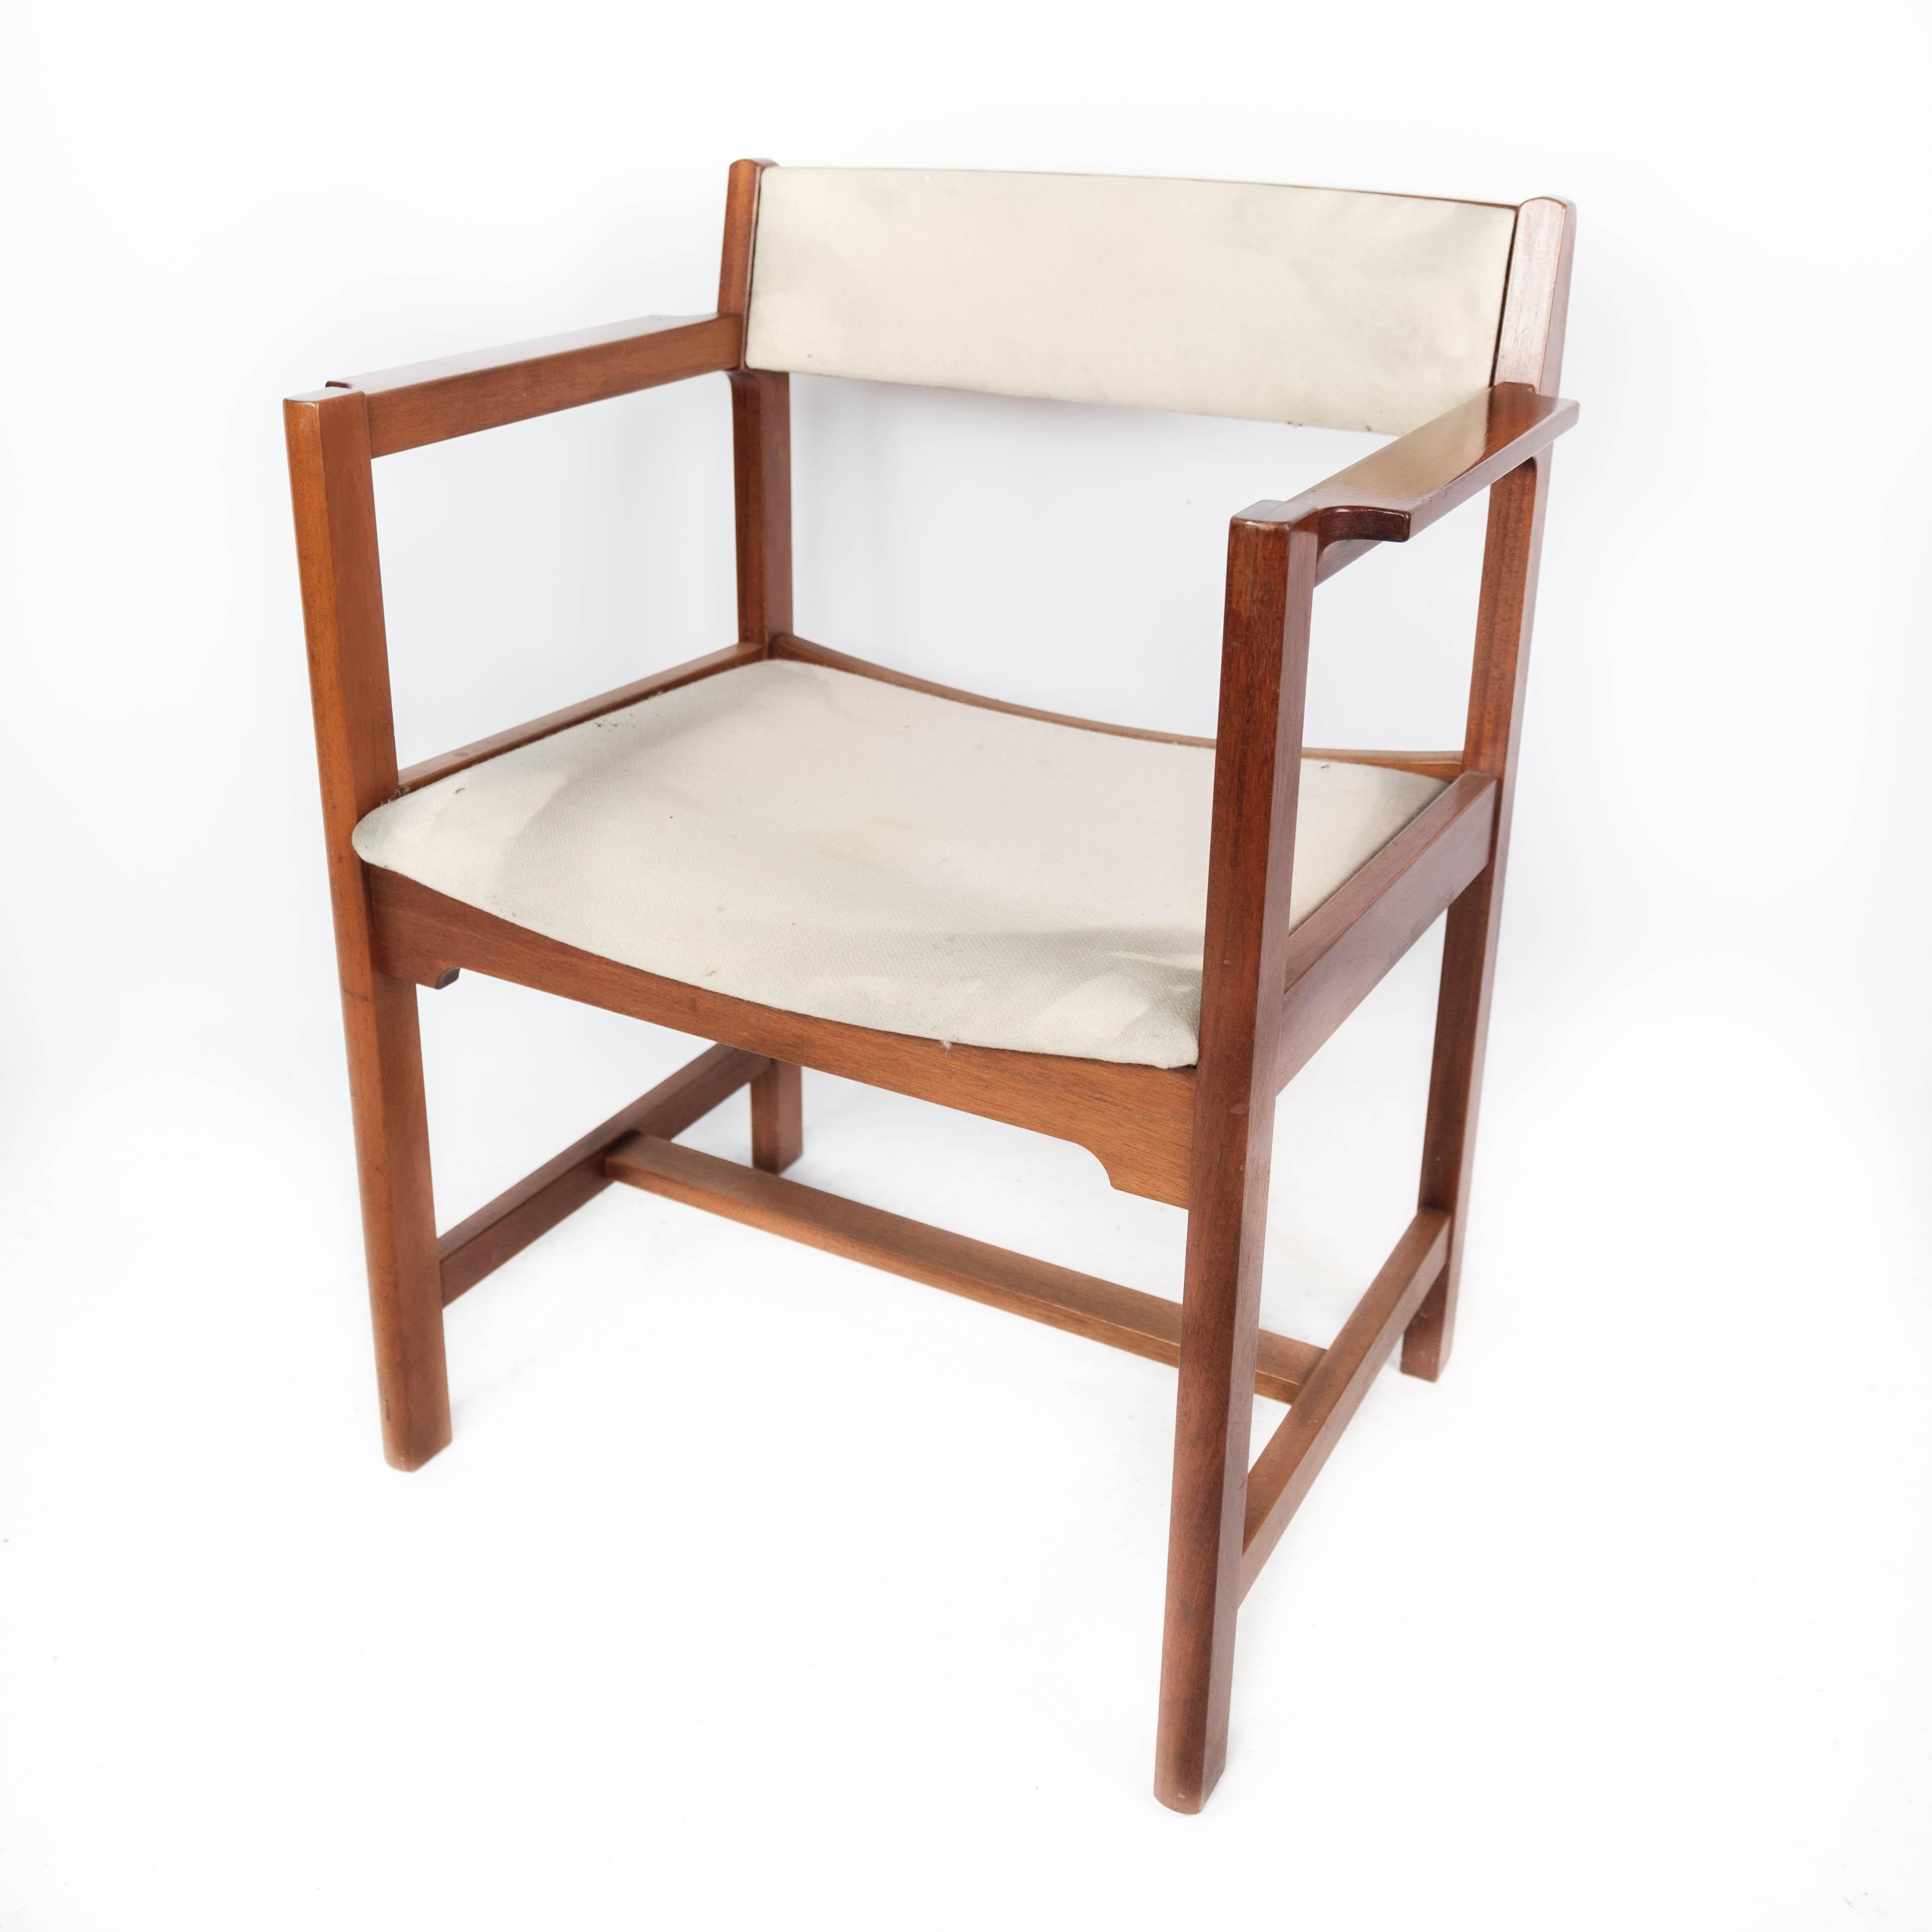 Armchair in mahogany and light fabric of Danish design manufactured by Søborg Furniture in the 1960s.